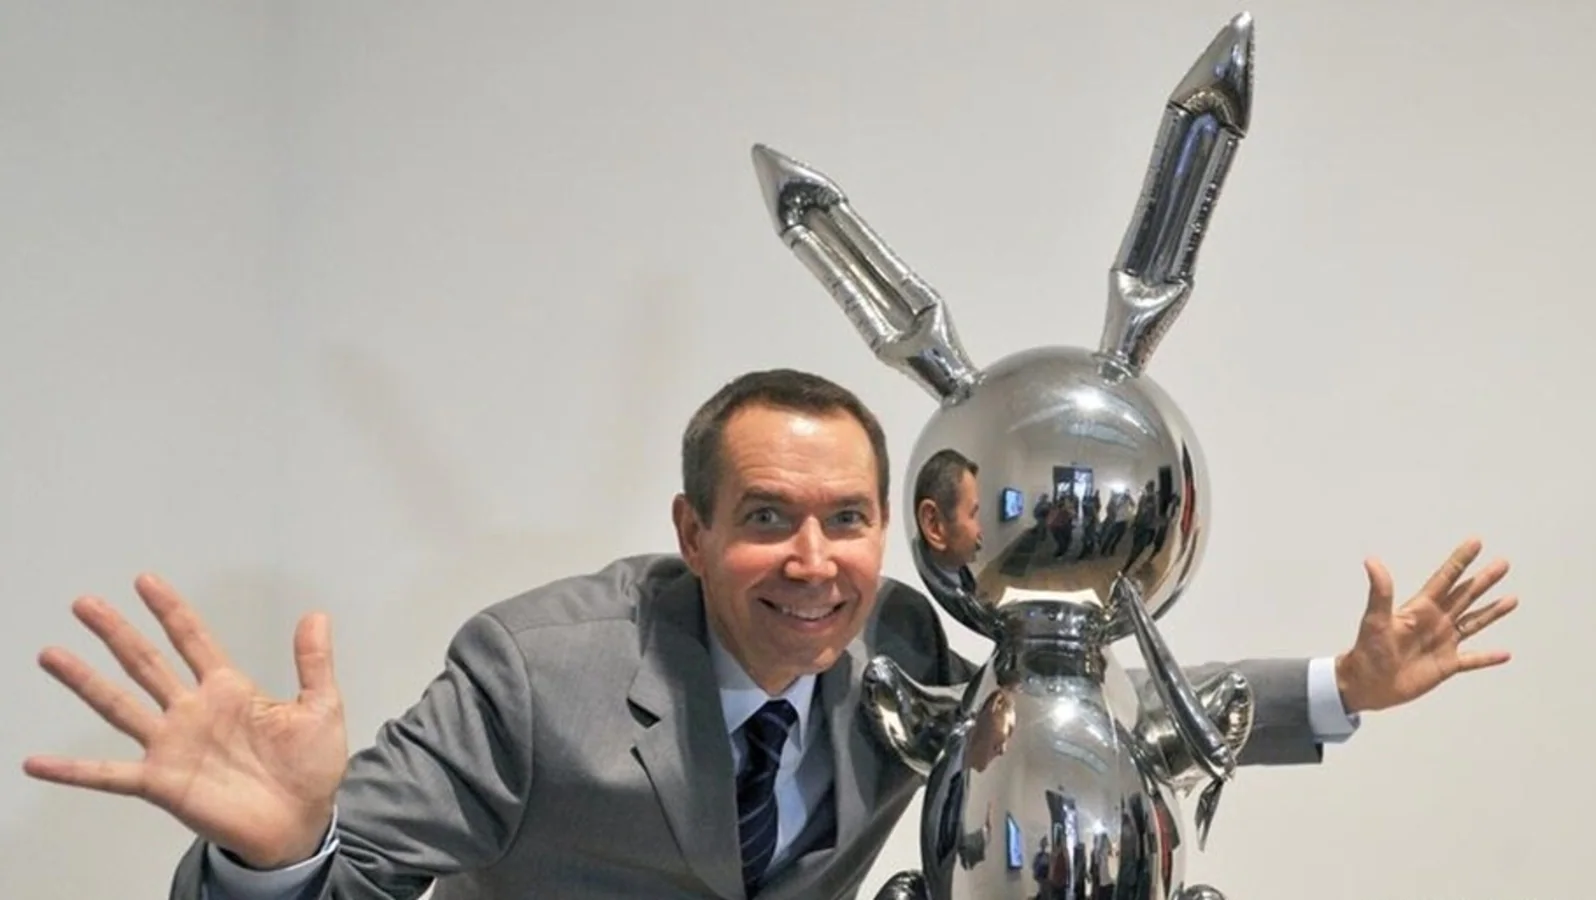 Artist Jeff Koons to send sculptures to the moon